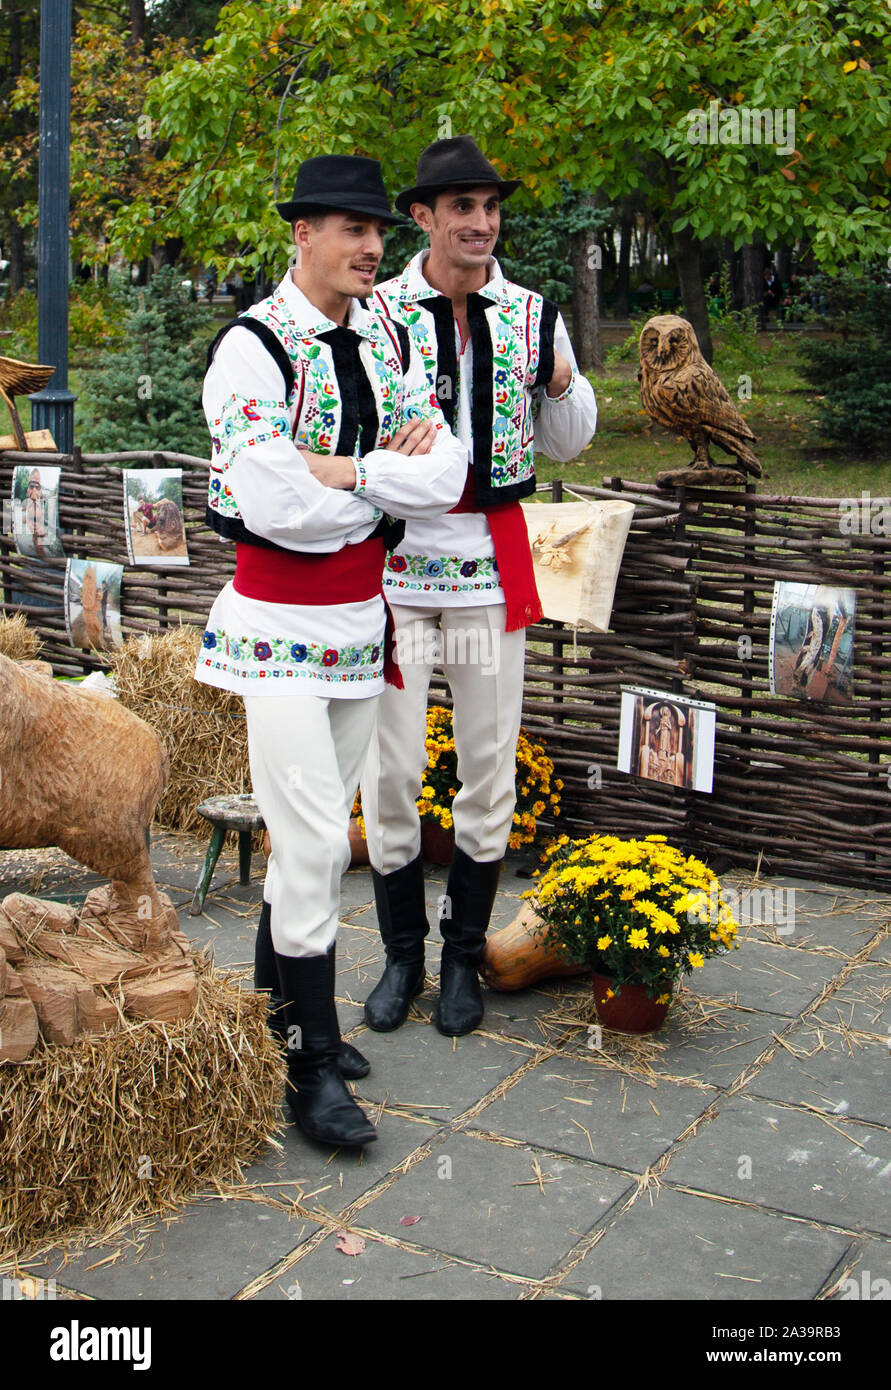 Chisinau, Moldova - October 5, 2019: Two young men in a traditional Balkan  costume at a festival in Chisinau, the capital of Moldova. Rest in the park  Stock Photo - Alamy